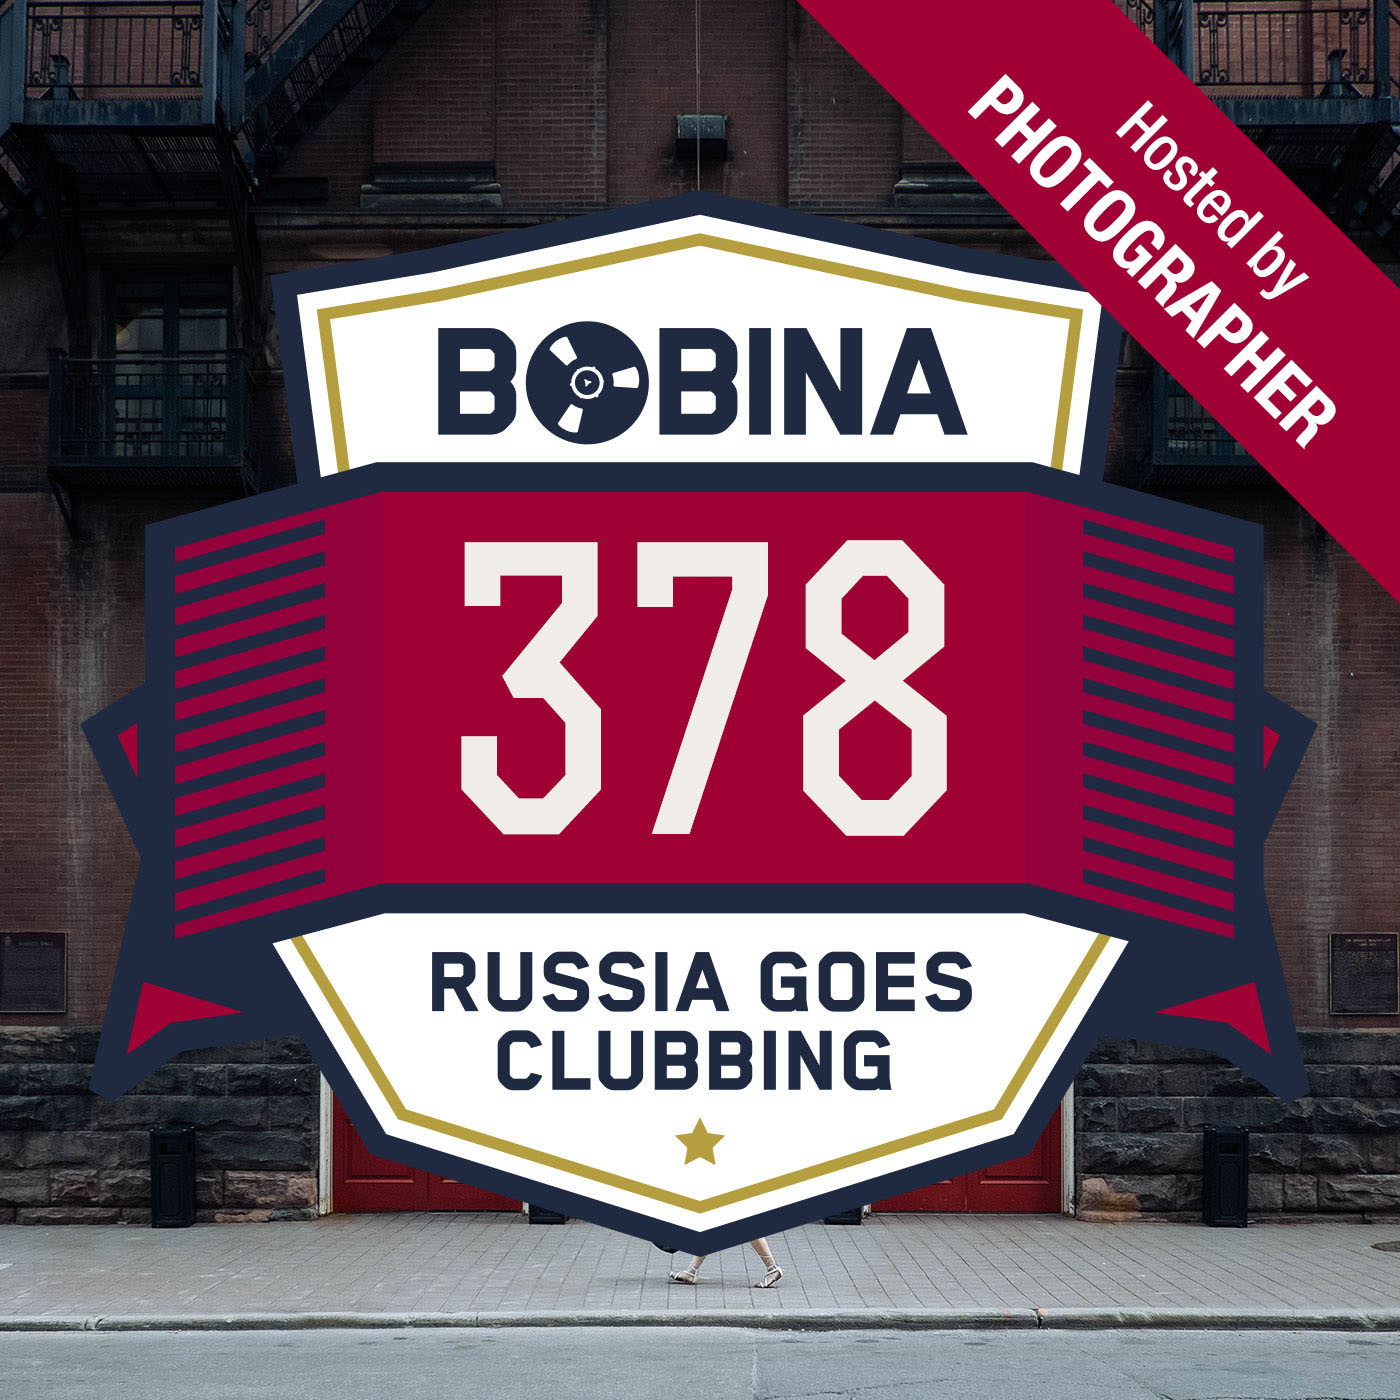 Nr. 378 Russia Goes Clubbing [Hosted by Photographer]